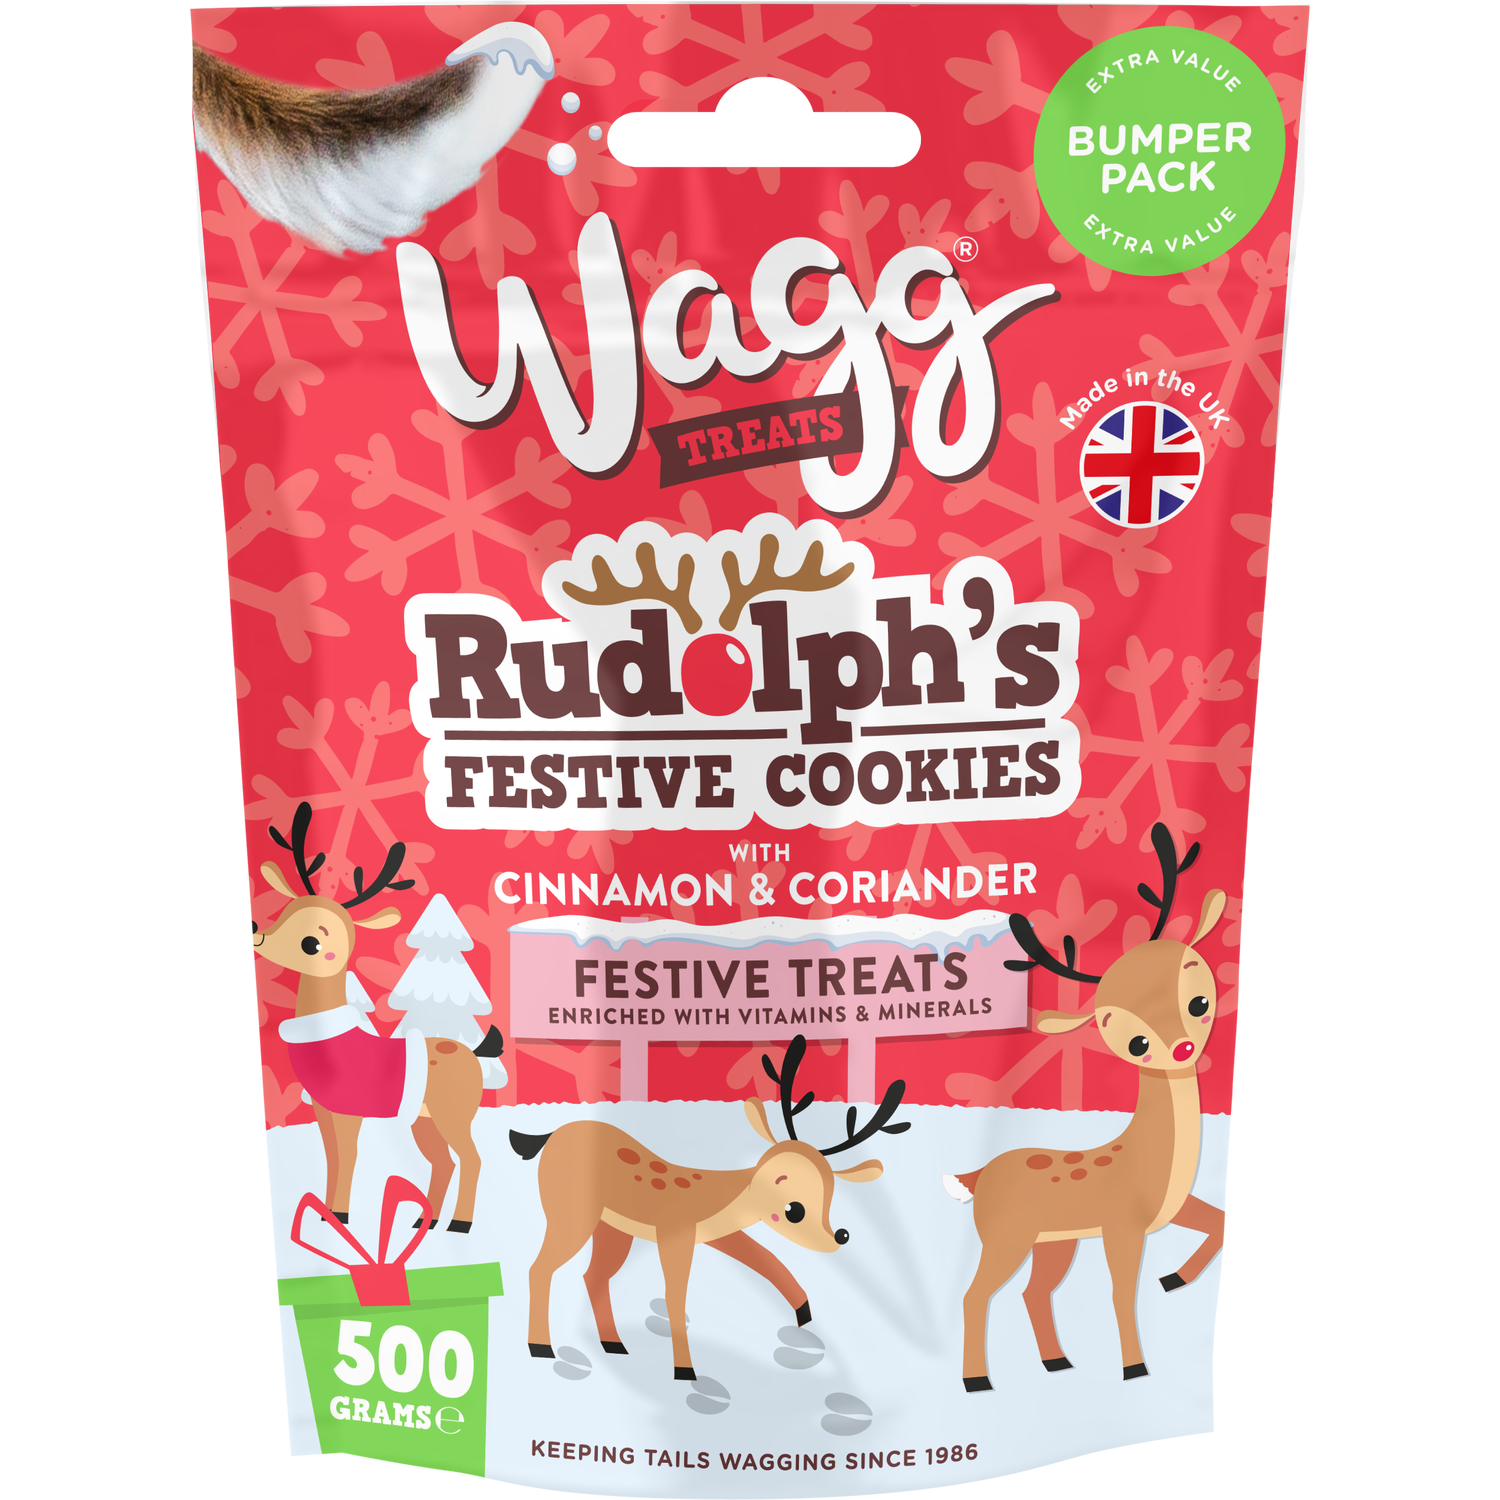 Wagg Festive Cookies with Cinnamon and Coriander Dog Treats 500g Image